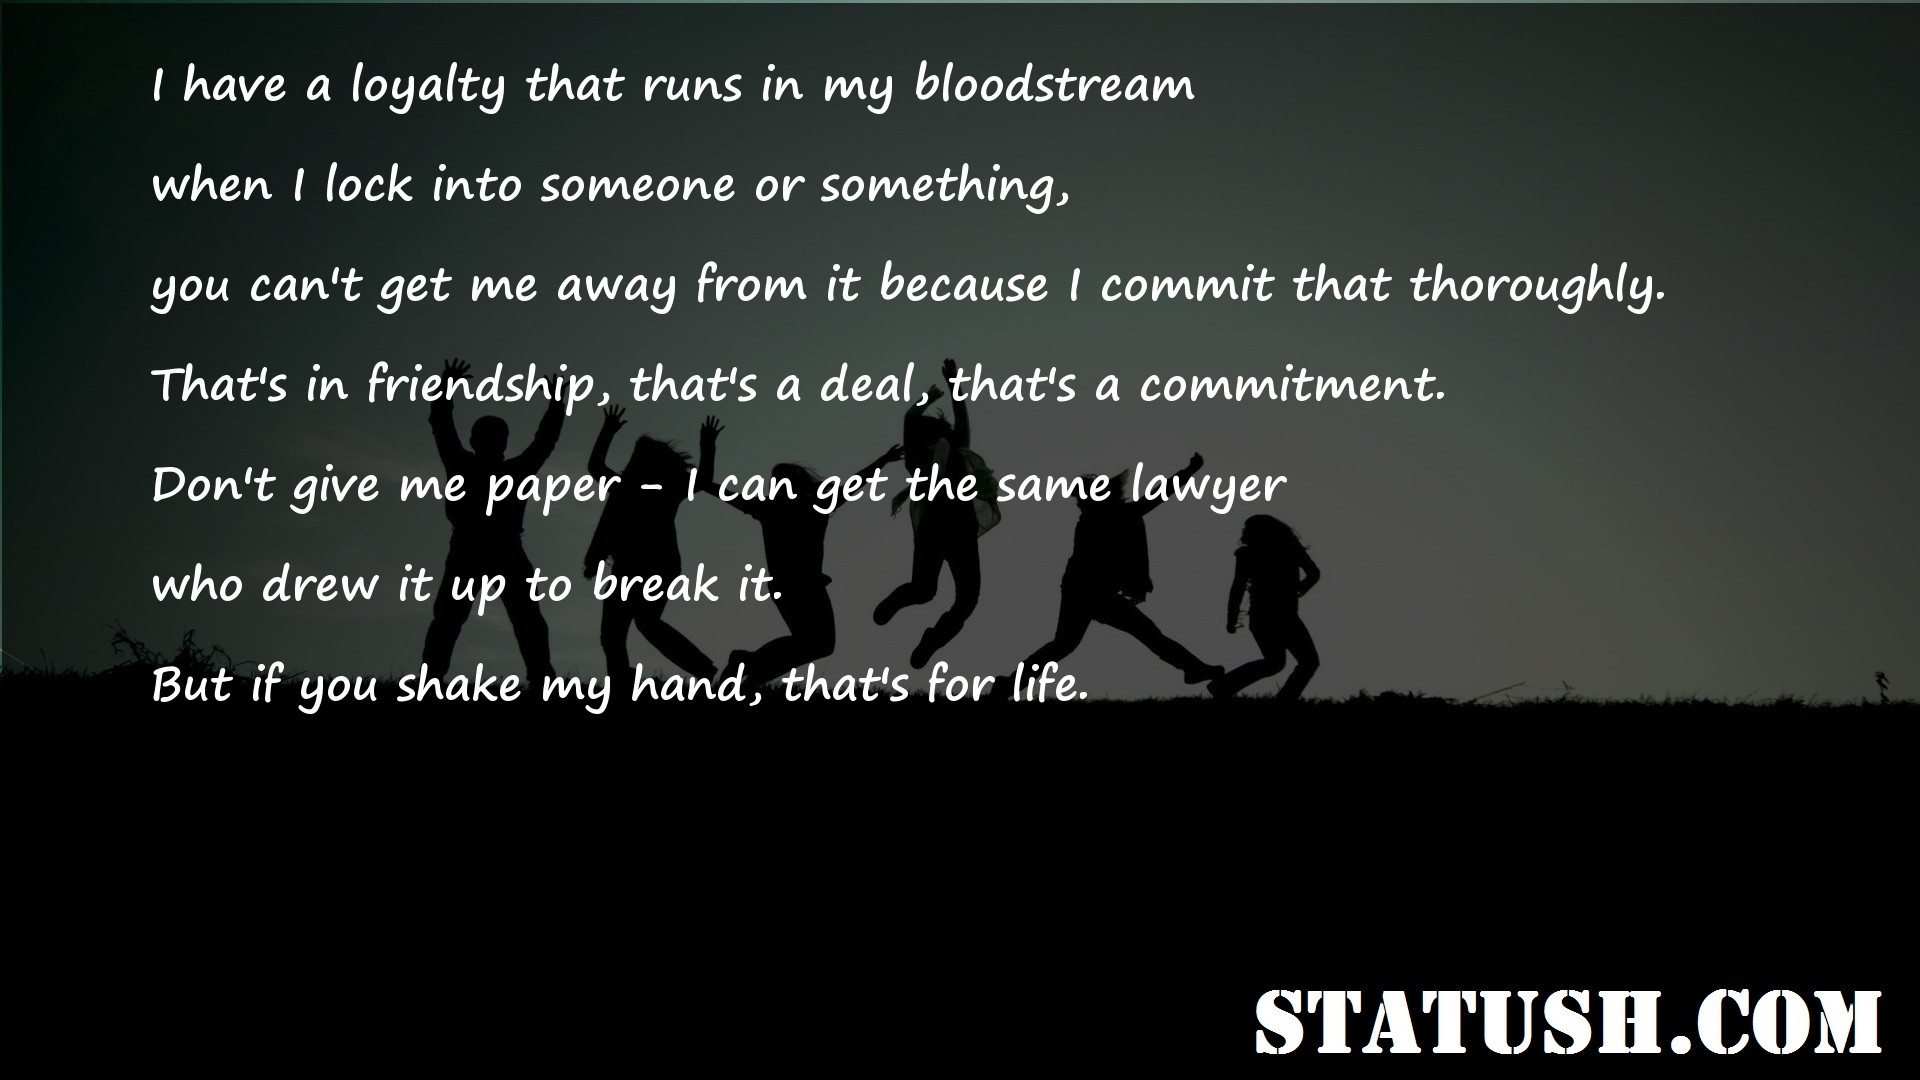 I have a loyalty that runs in my bloodstream - Friendship Quotes at statush.com